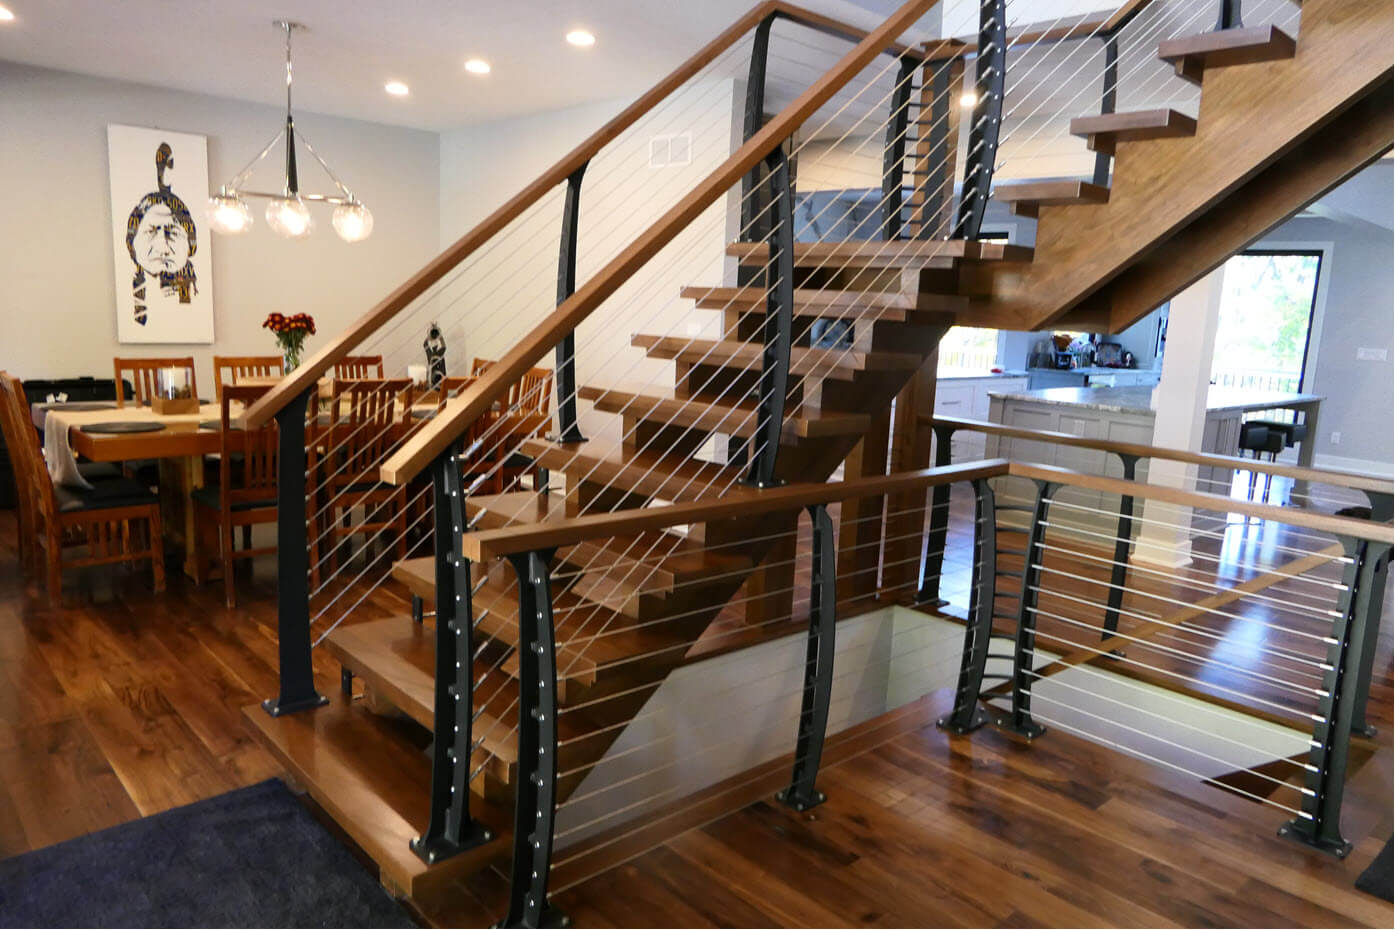 Center entry stairs with open risers and cable railings